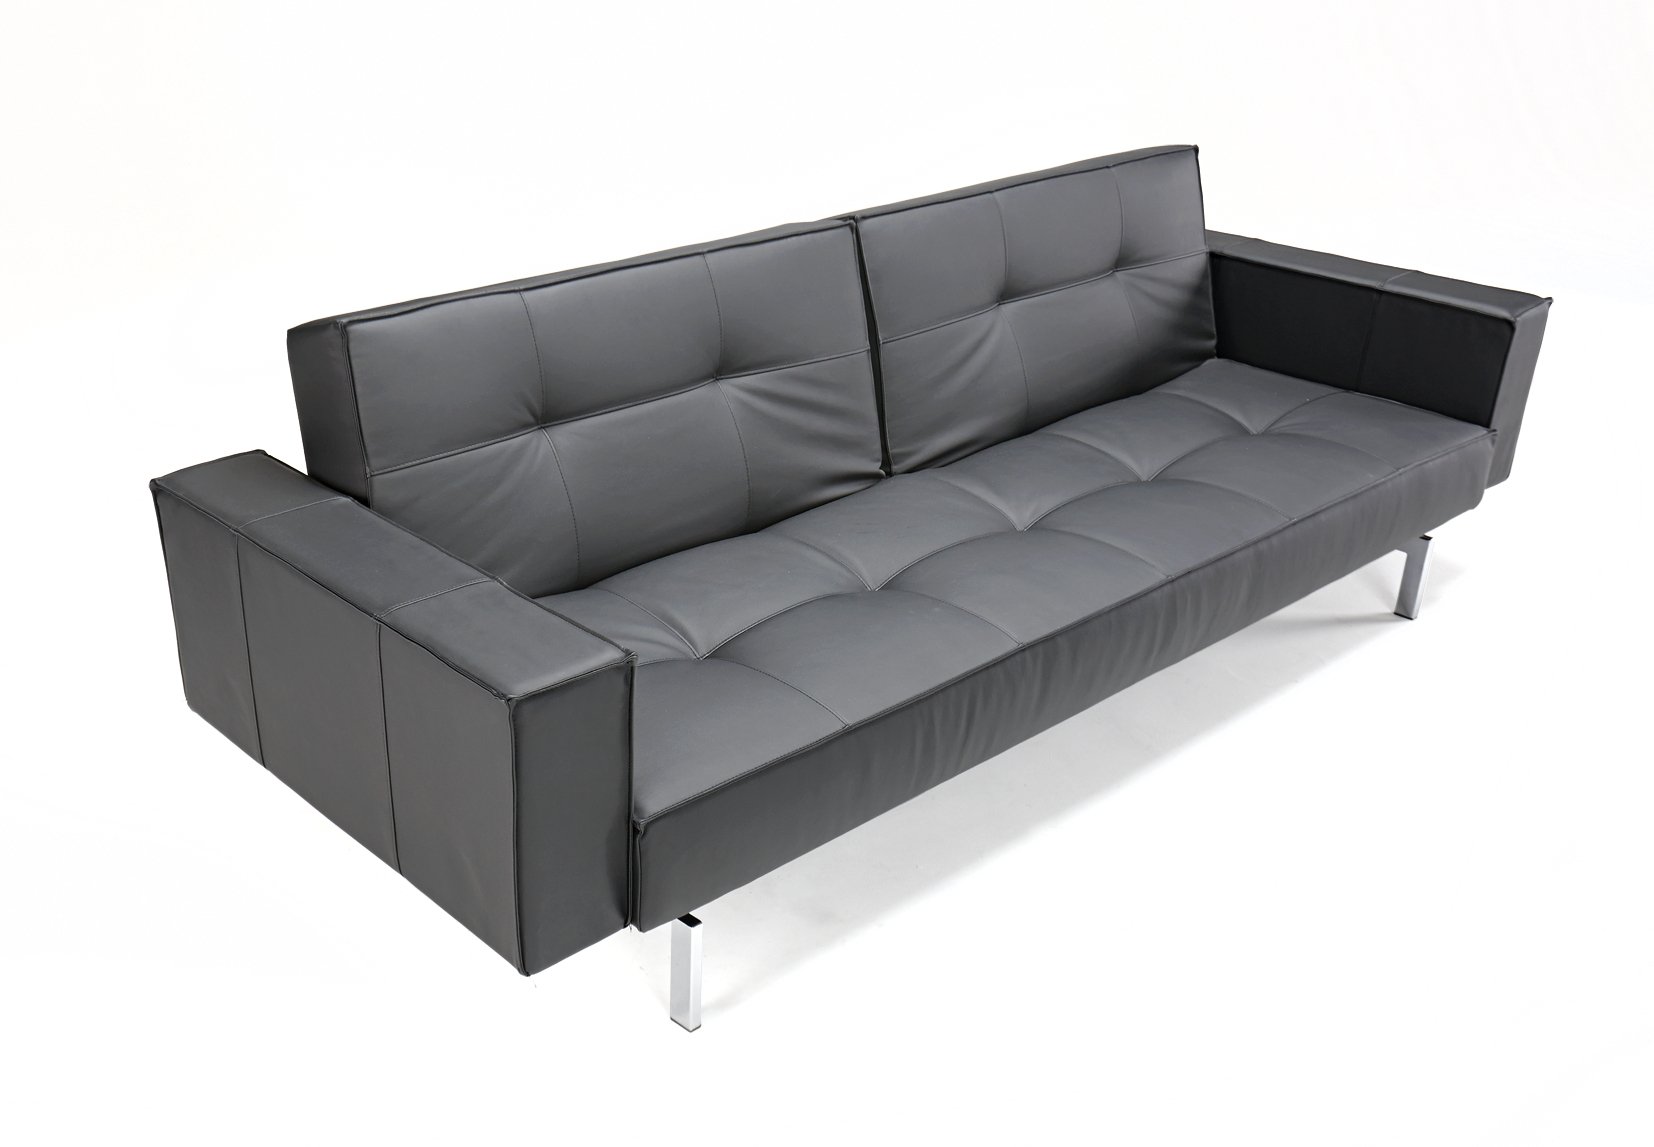 splitback sofa bed with arms